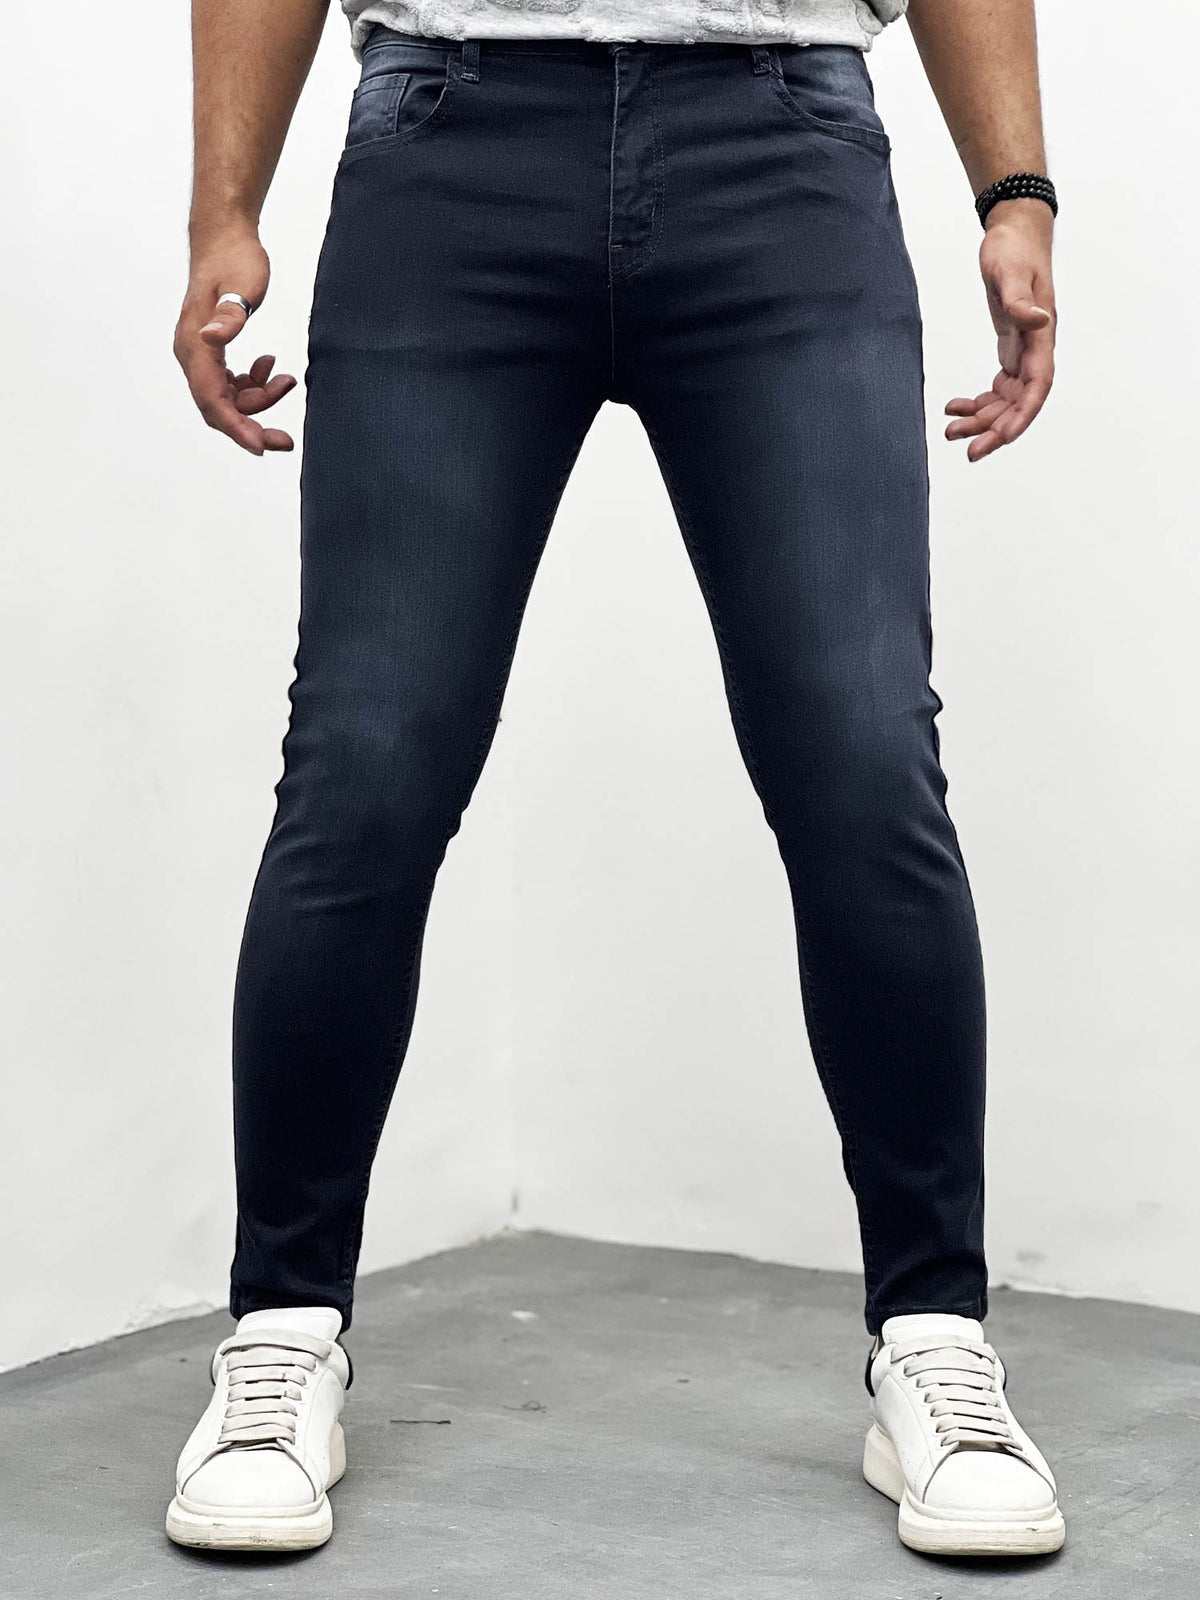 Turbo Ankle Fit Jeans In Faded Black